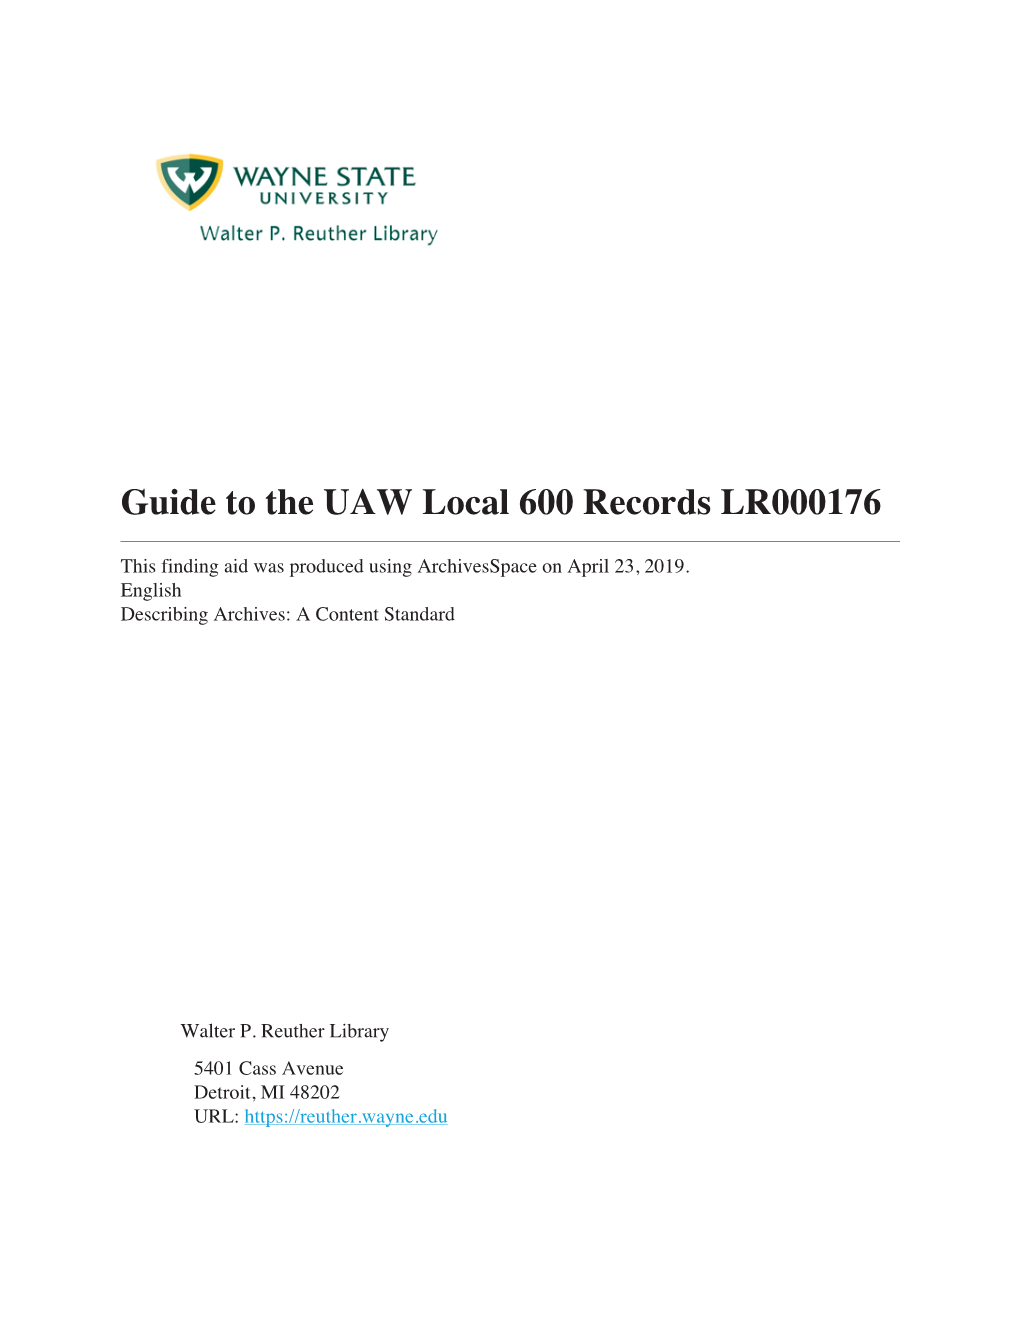 Guide to the UAW Local 600 Records LR000176